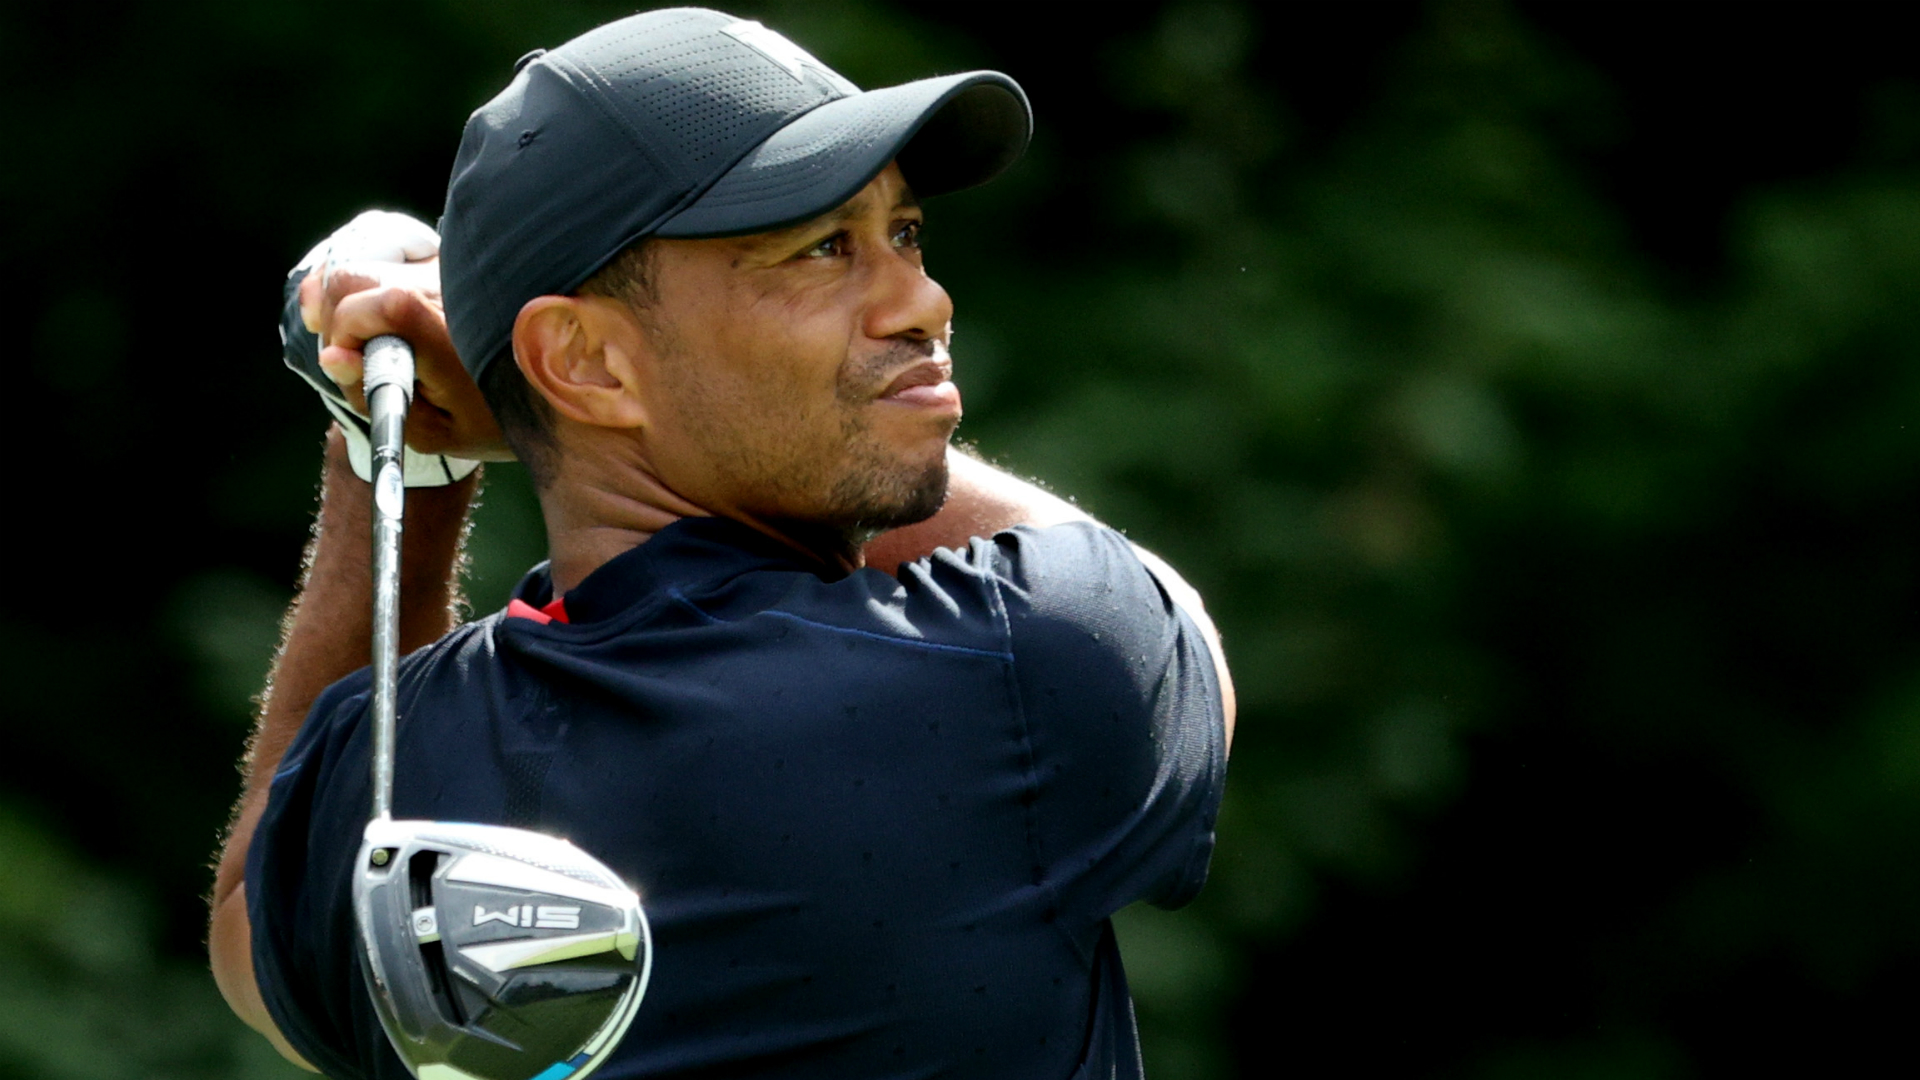 BREAKING NEWS: Tiger Woods taken to hospital after vehicle collision